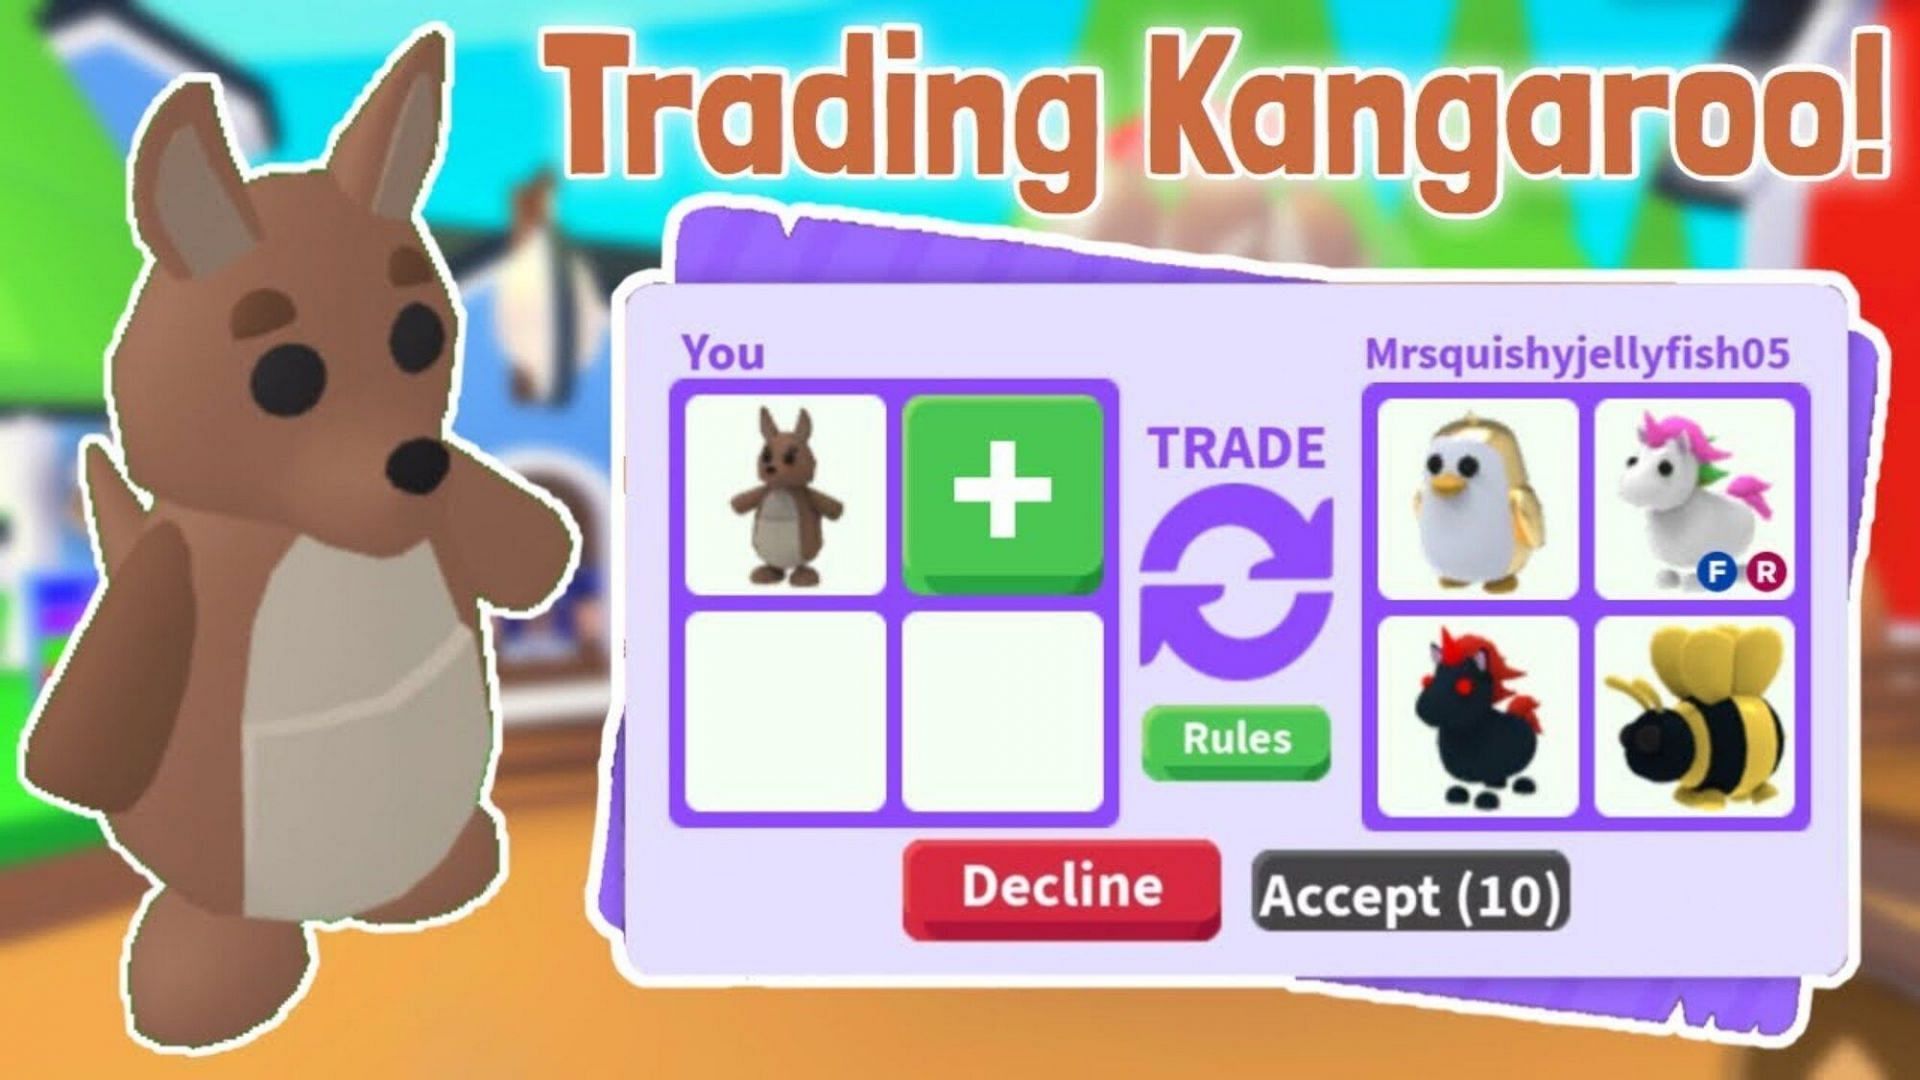 Roblox Adopt Me Trading Values - What is Turtle Worth